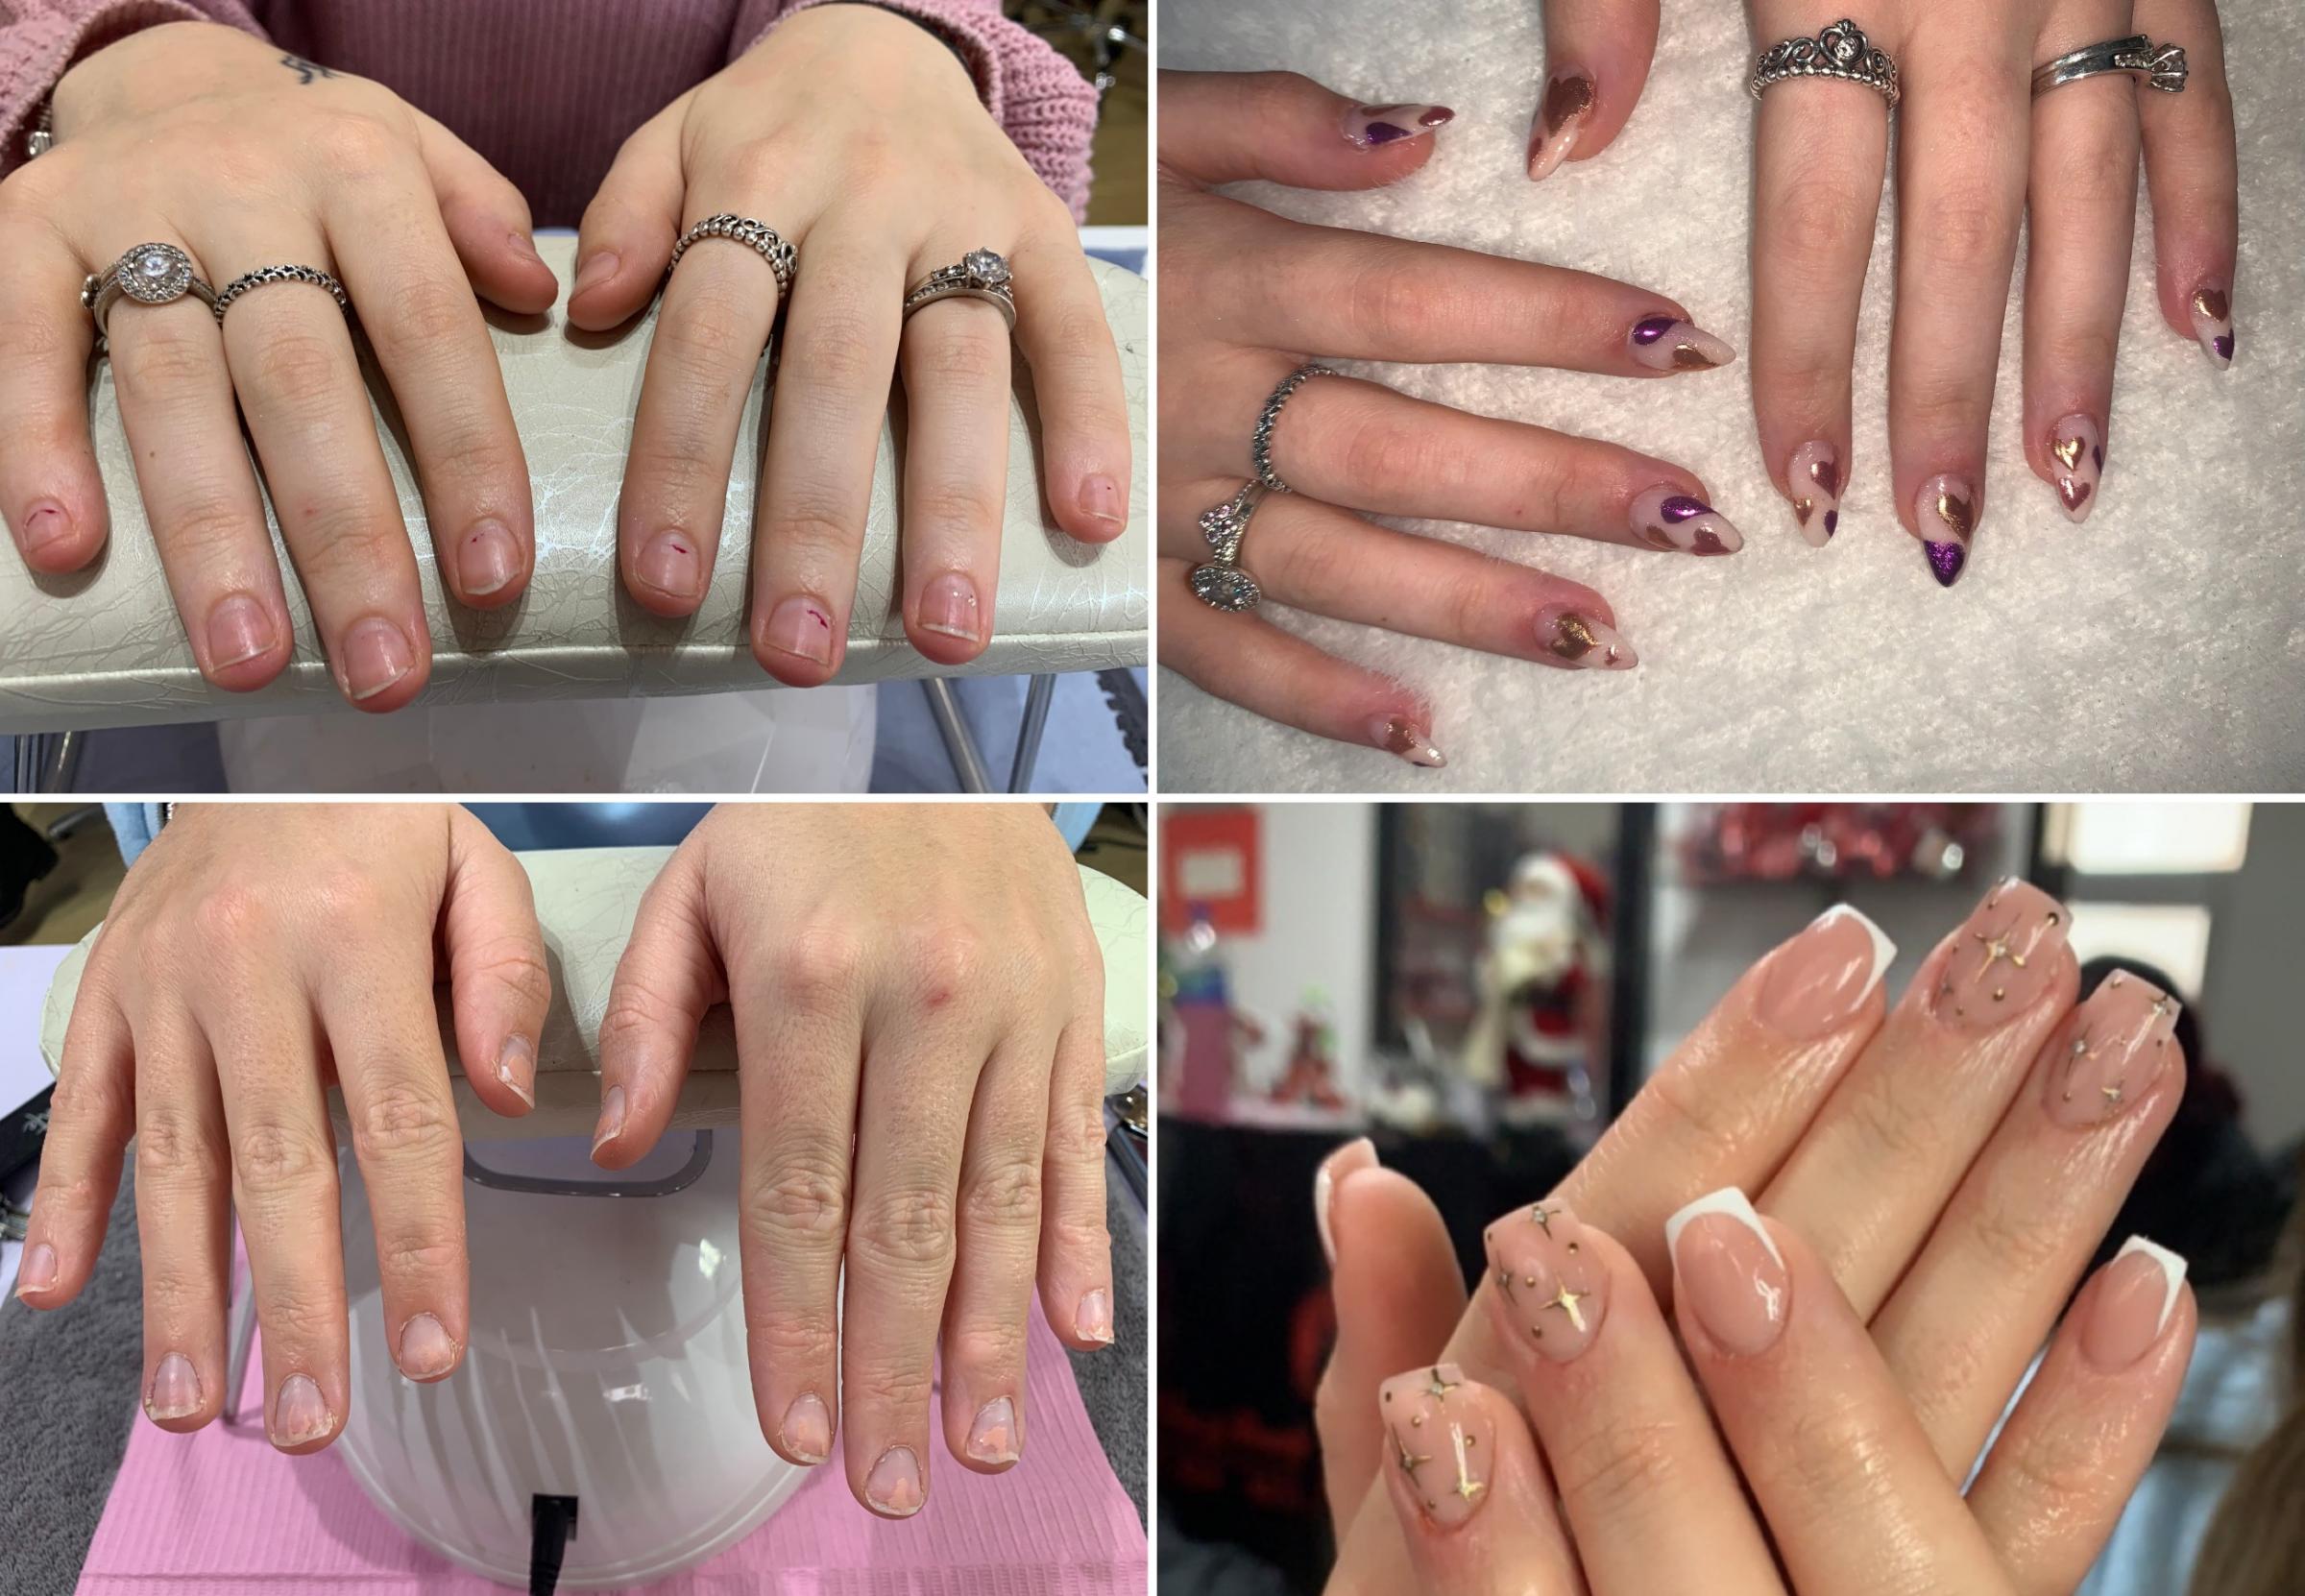 Before and after nail treatment